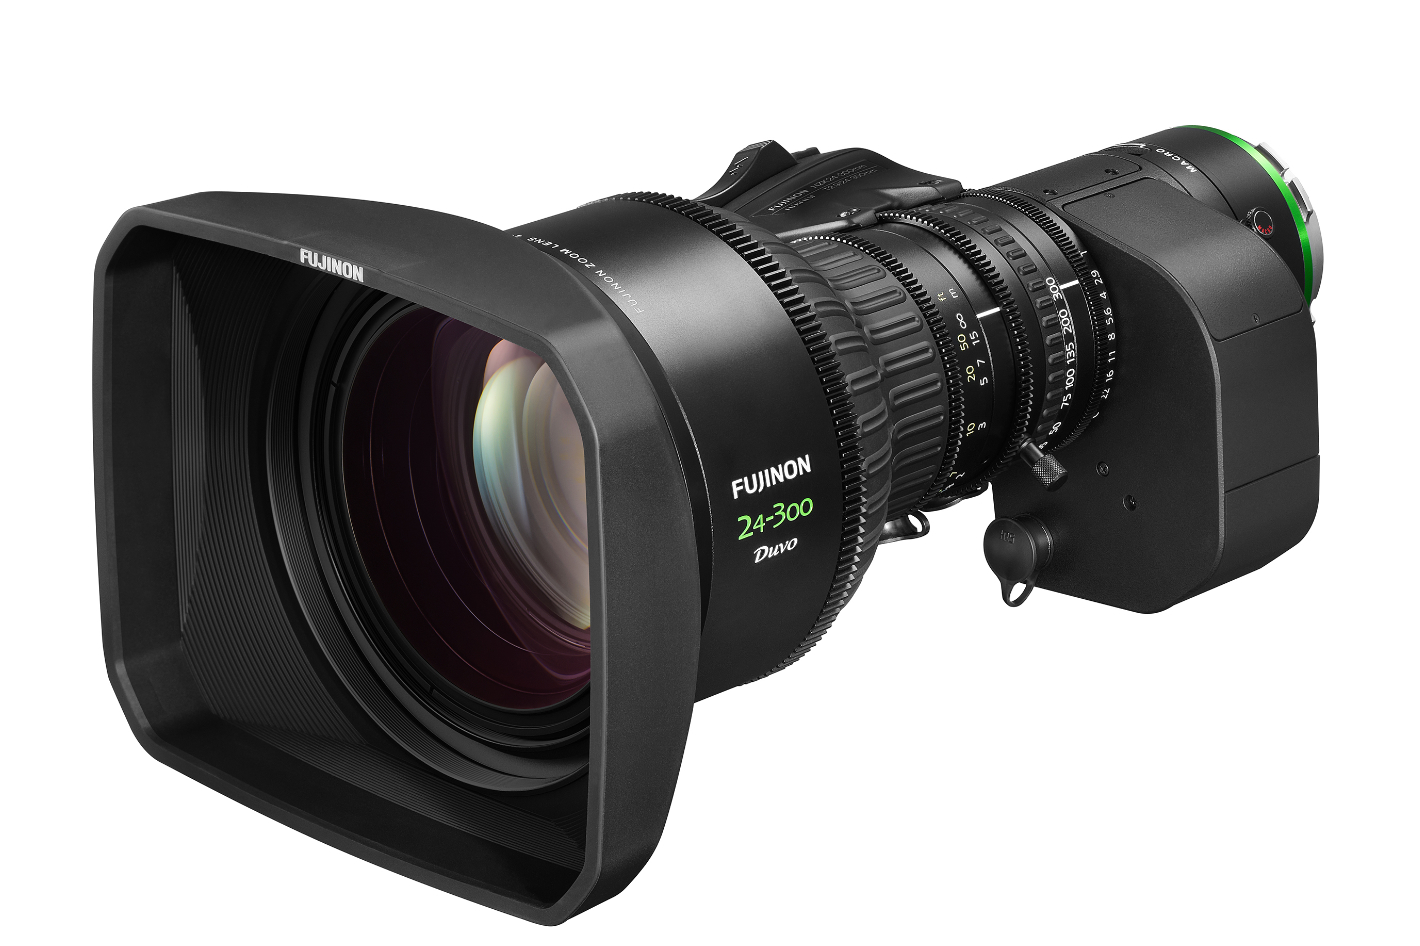 FUJINON Duvo HZK24-300mm PL Mount Zoom Lens now available 1